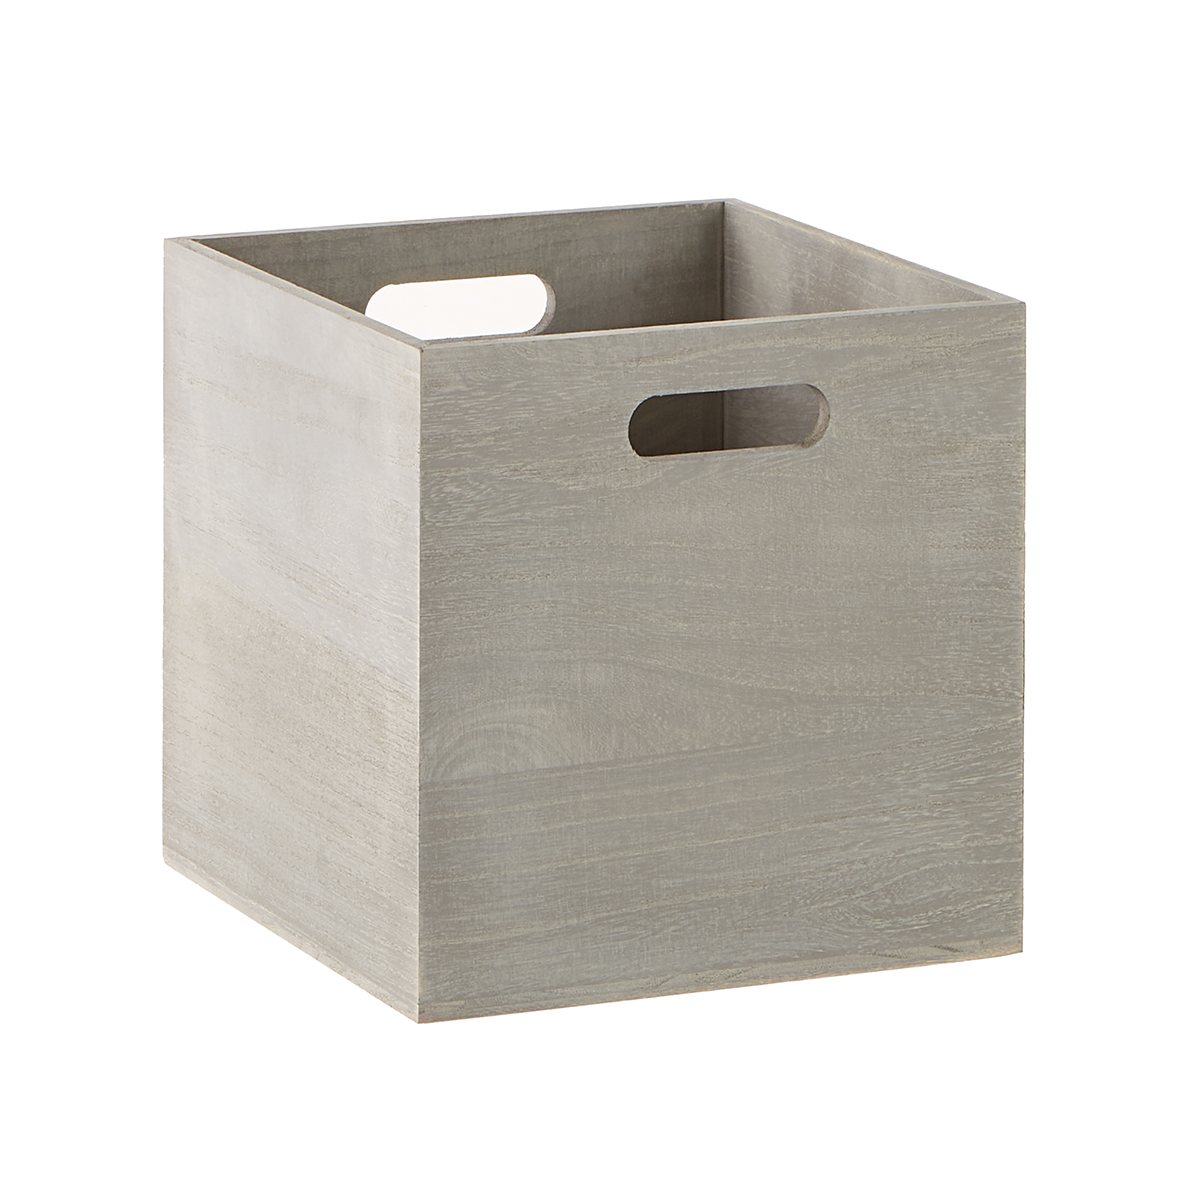 Brentwood Storage Cube | The Container Store